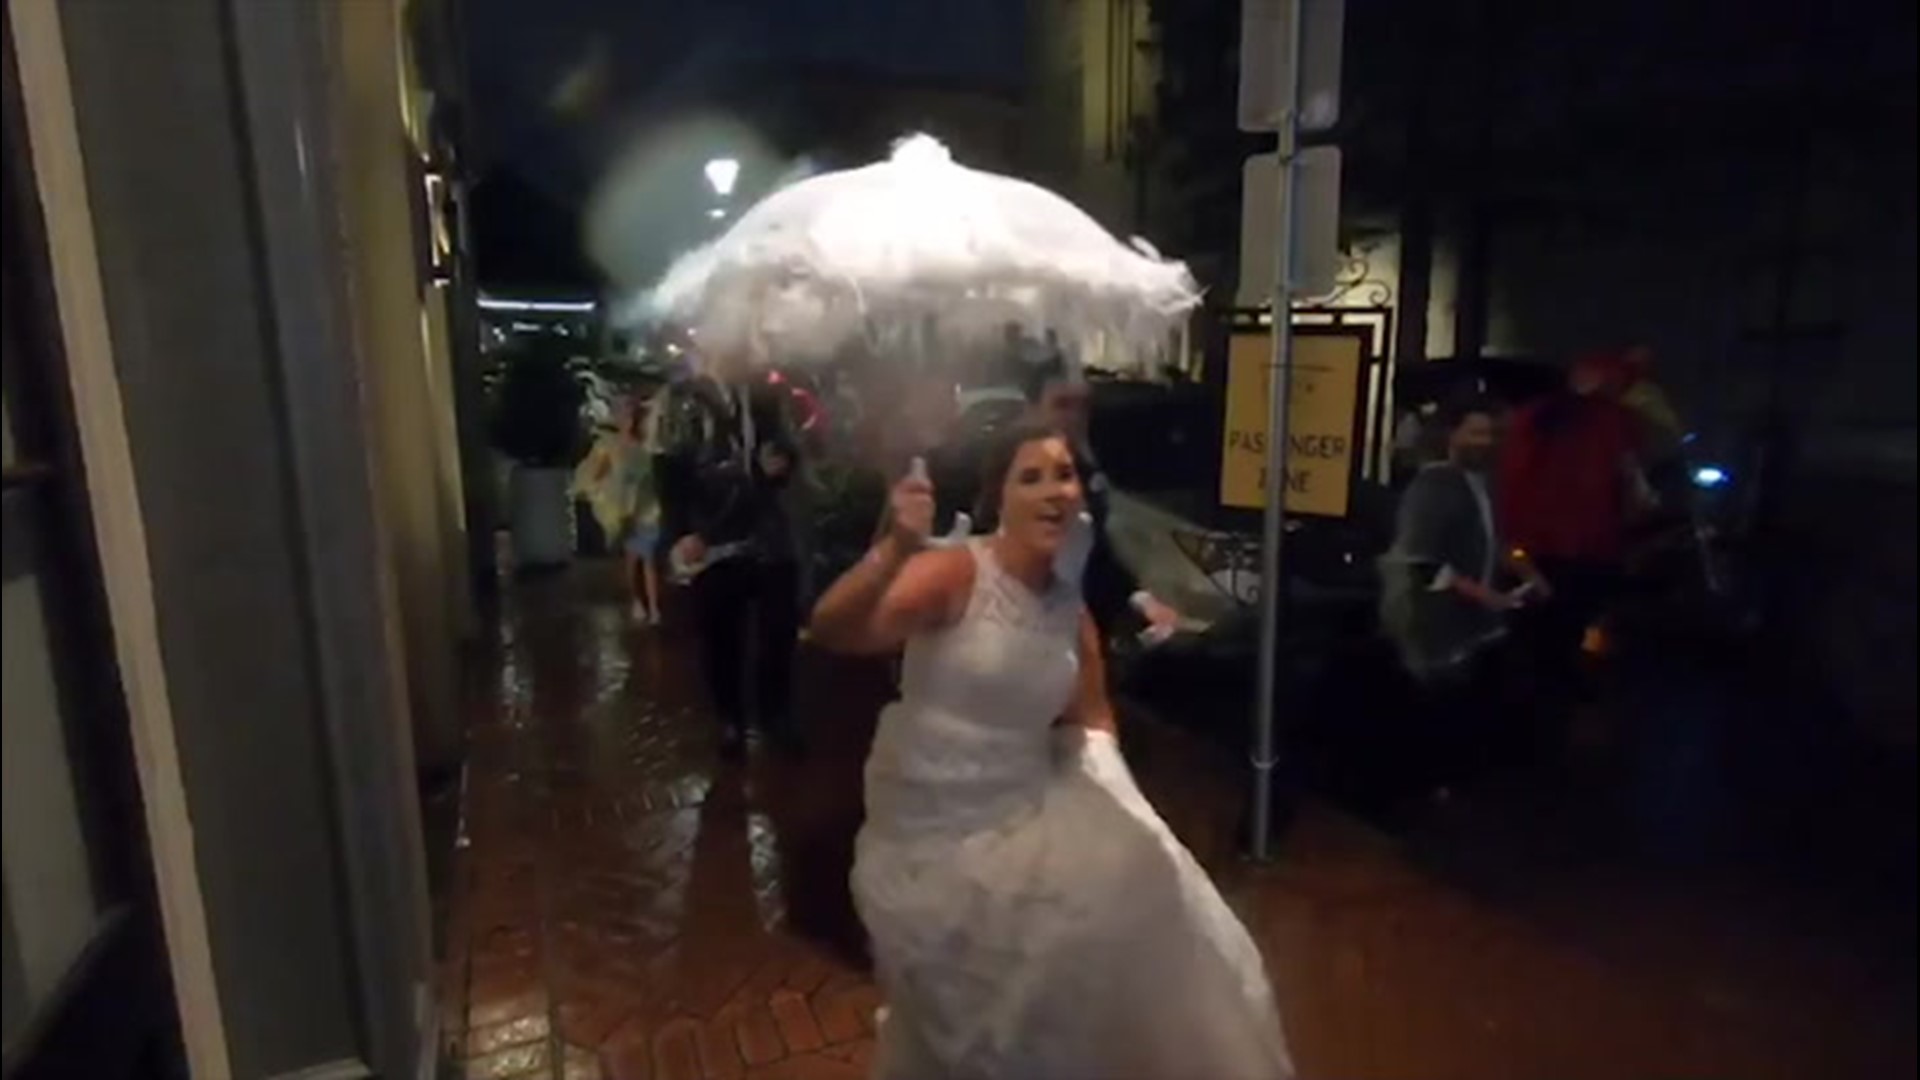 Despite rainy conditions brought by Barry, it didn't stop these newly weds from parading through the streets of New Orleans, Louisiana on July 13.